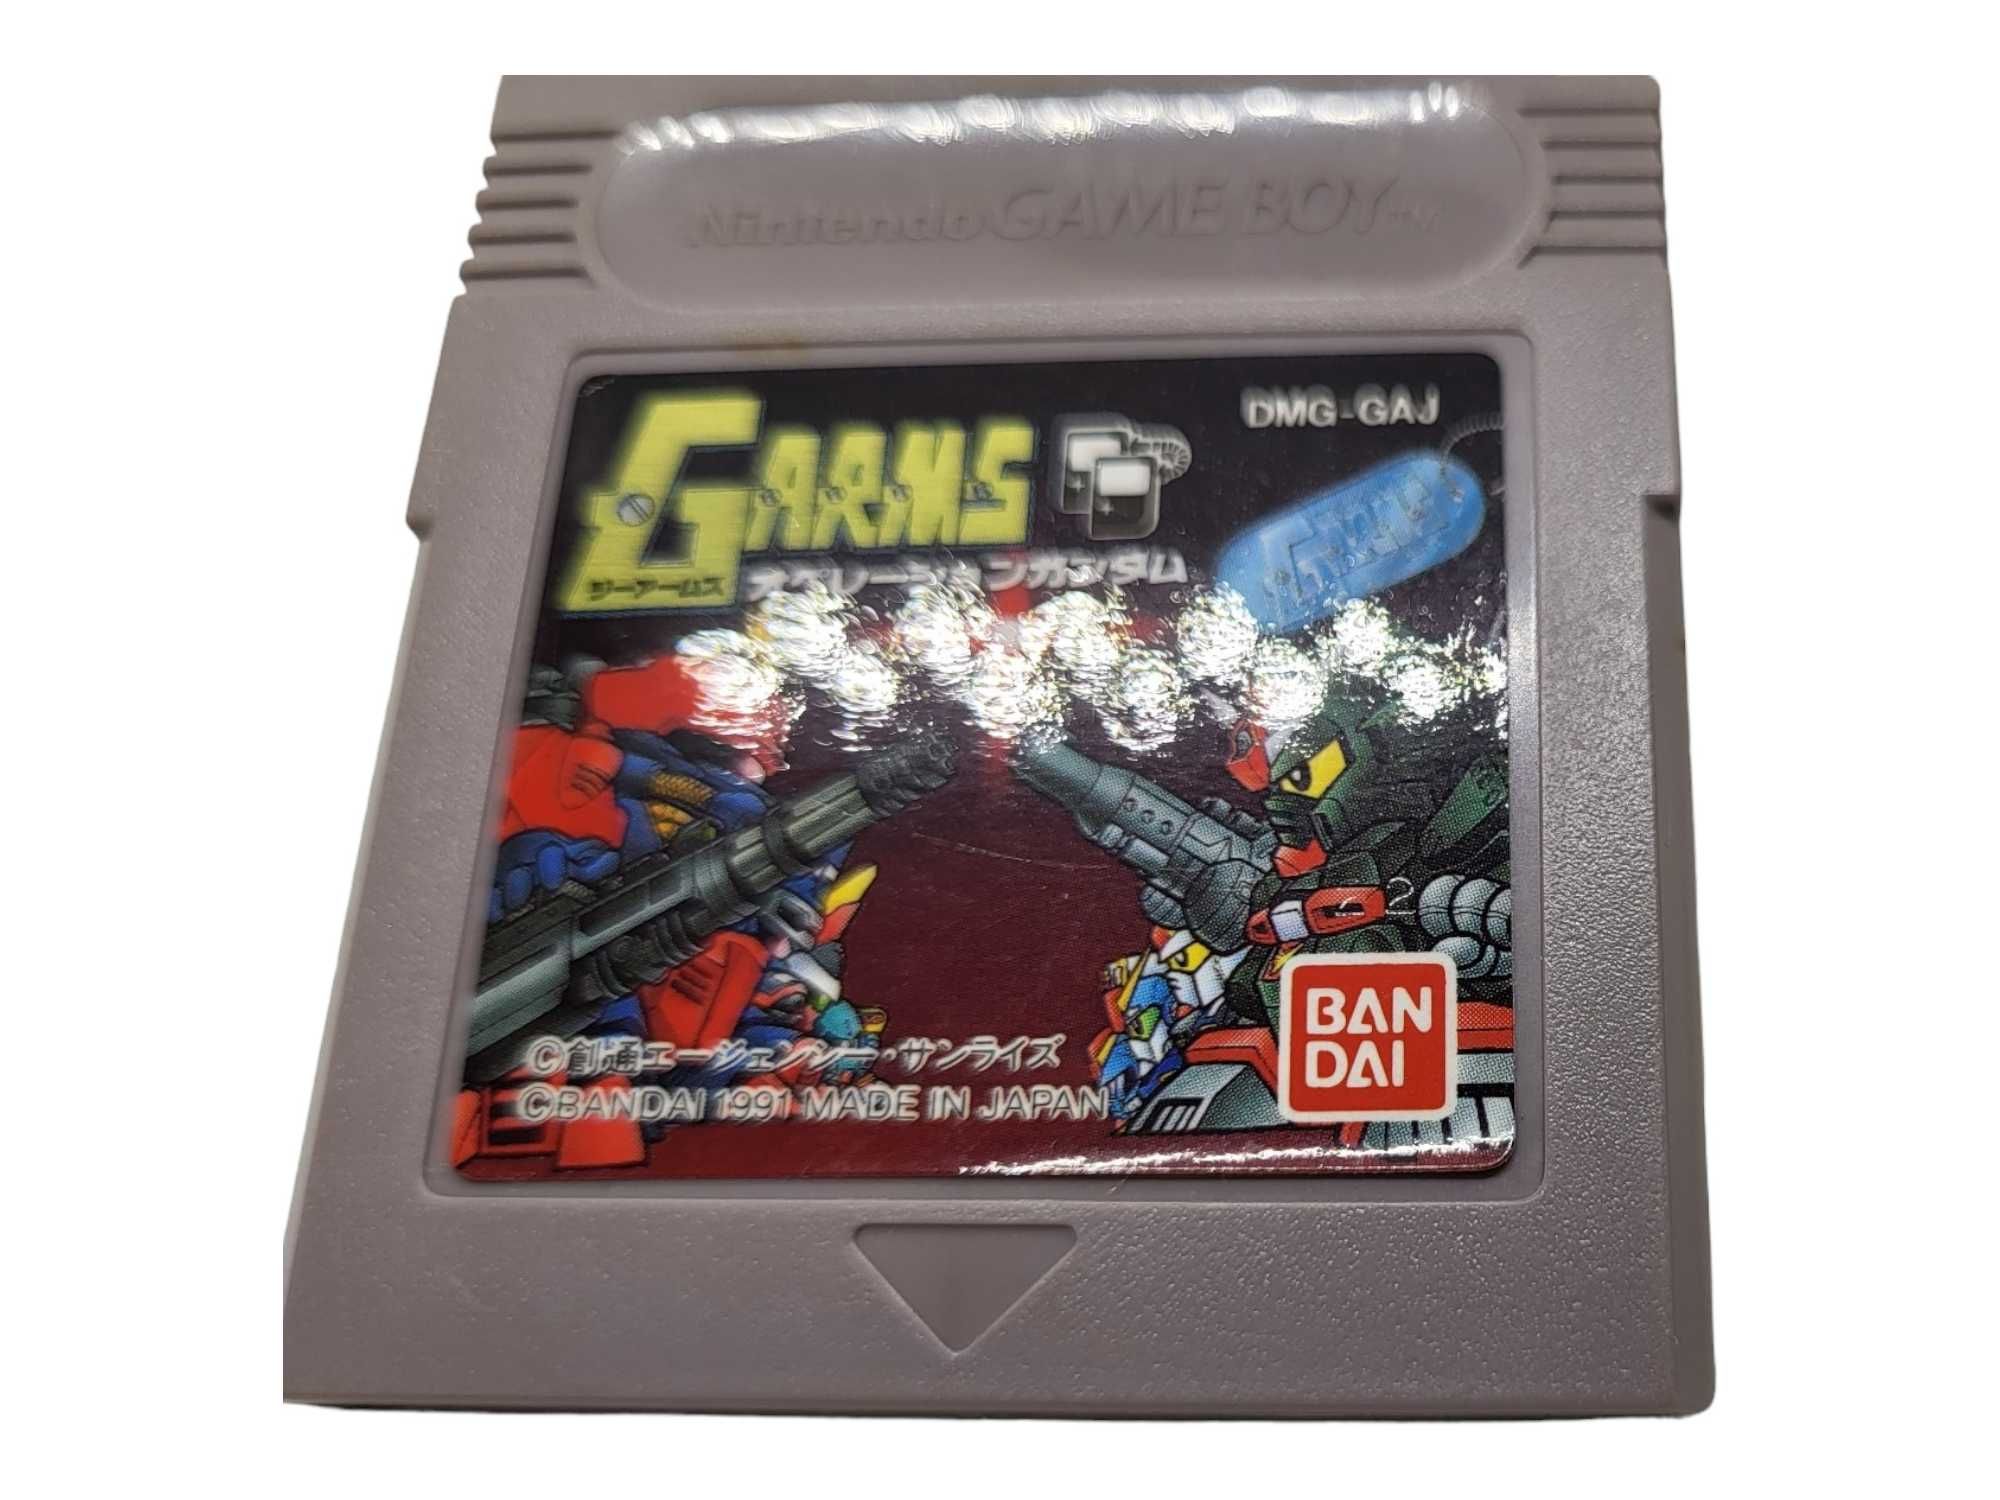 G-Arms Game Boy Gameboy Classic